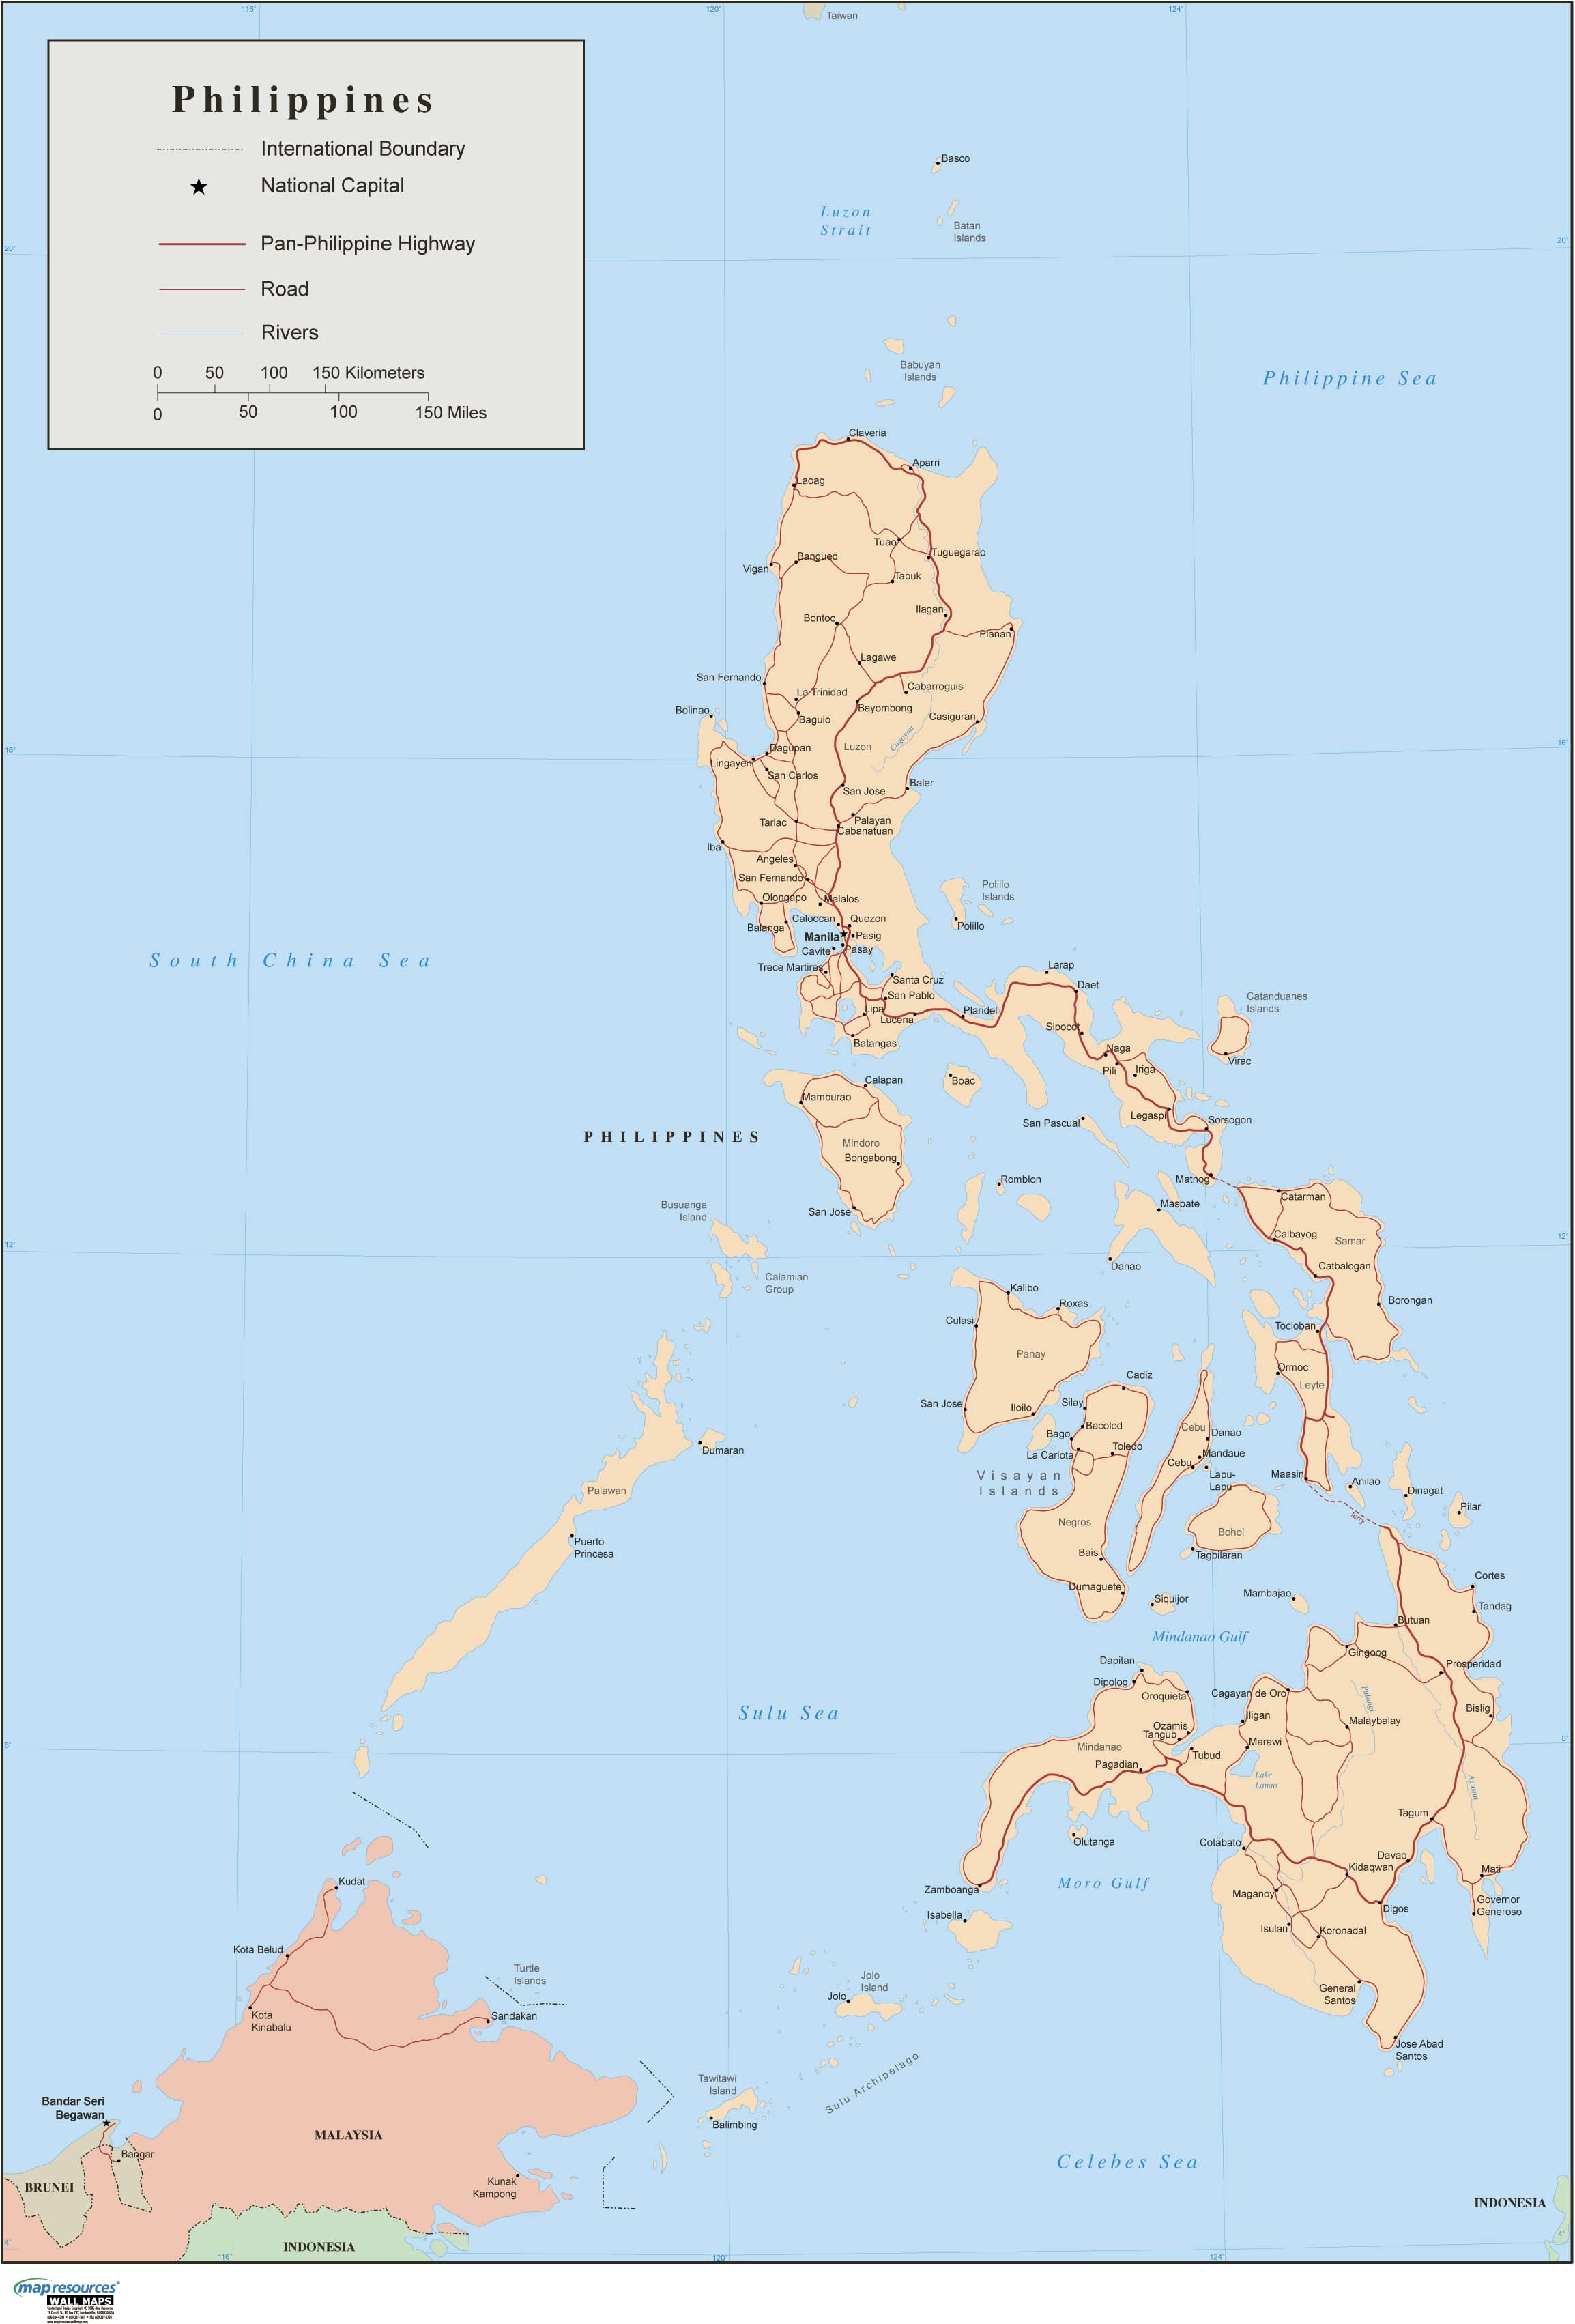 Philippines Wall Map by Map Resources - MapSales.com